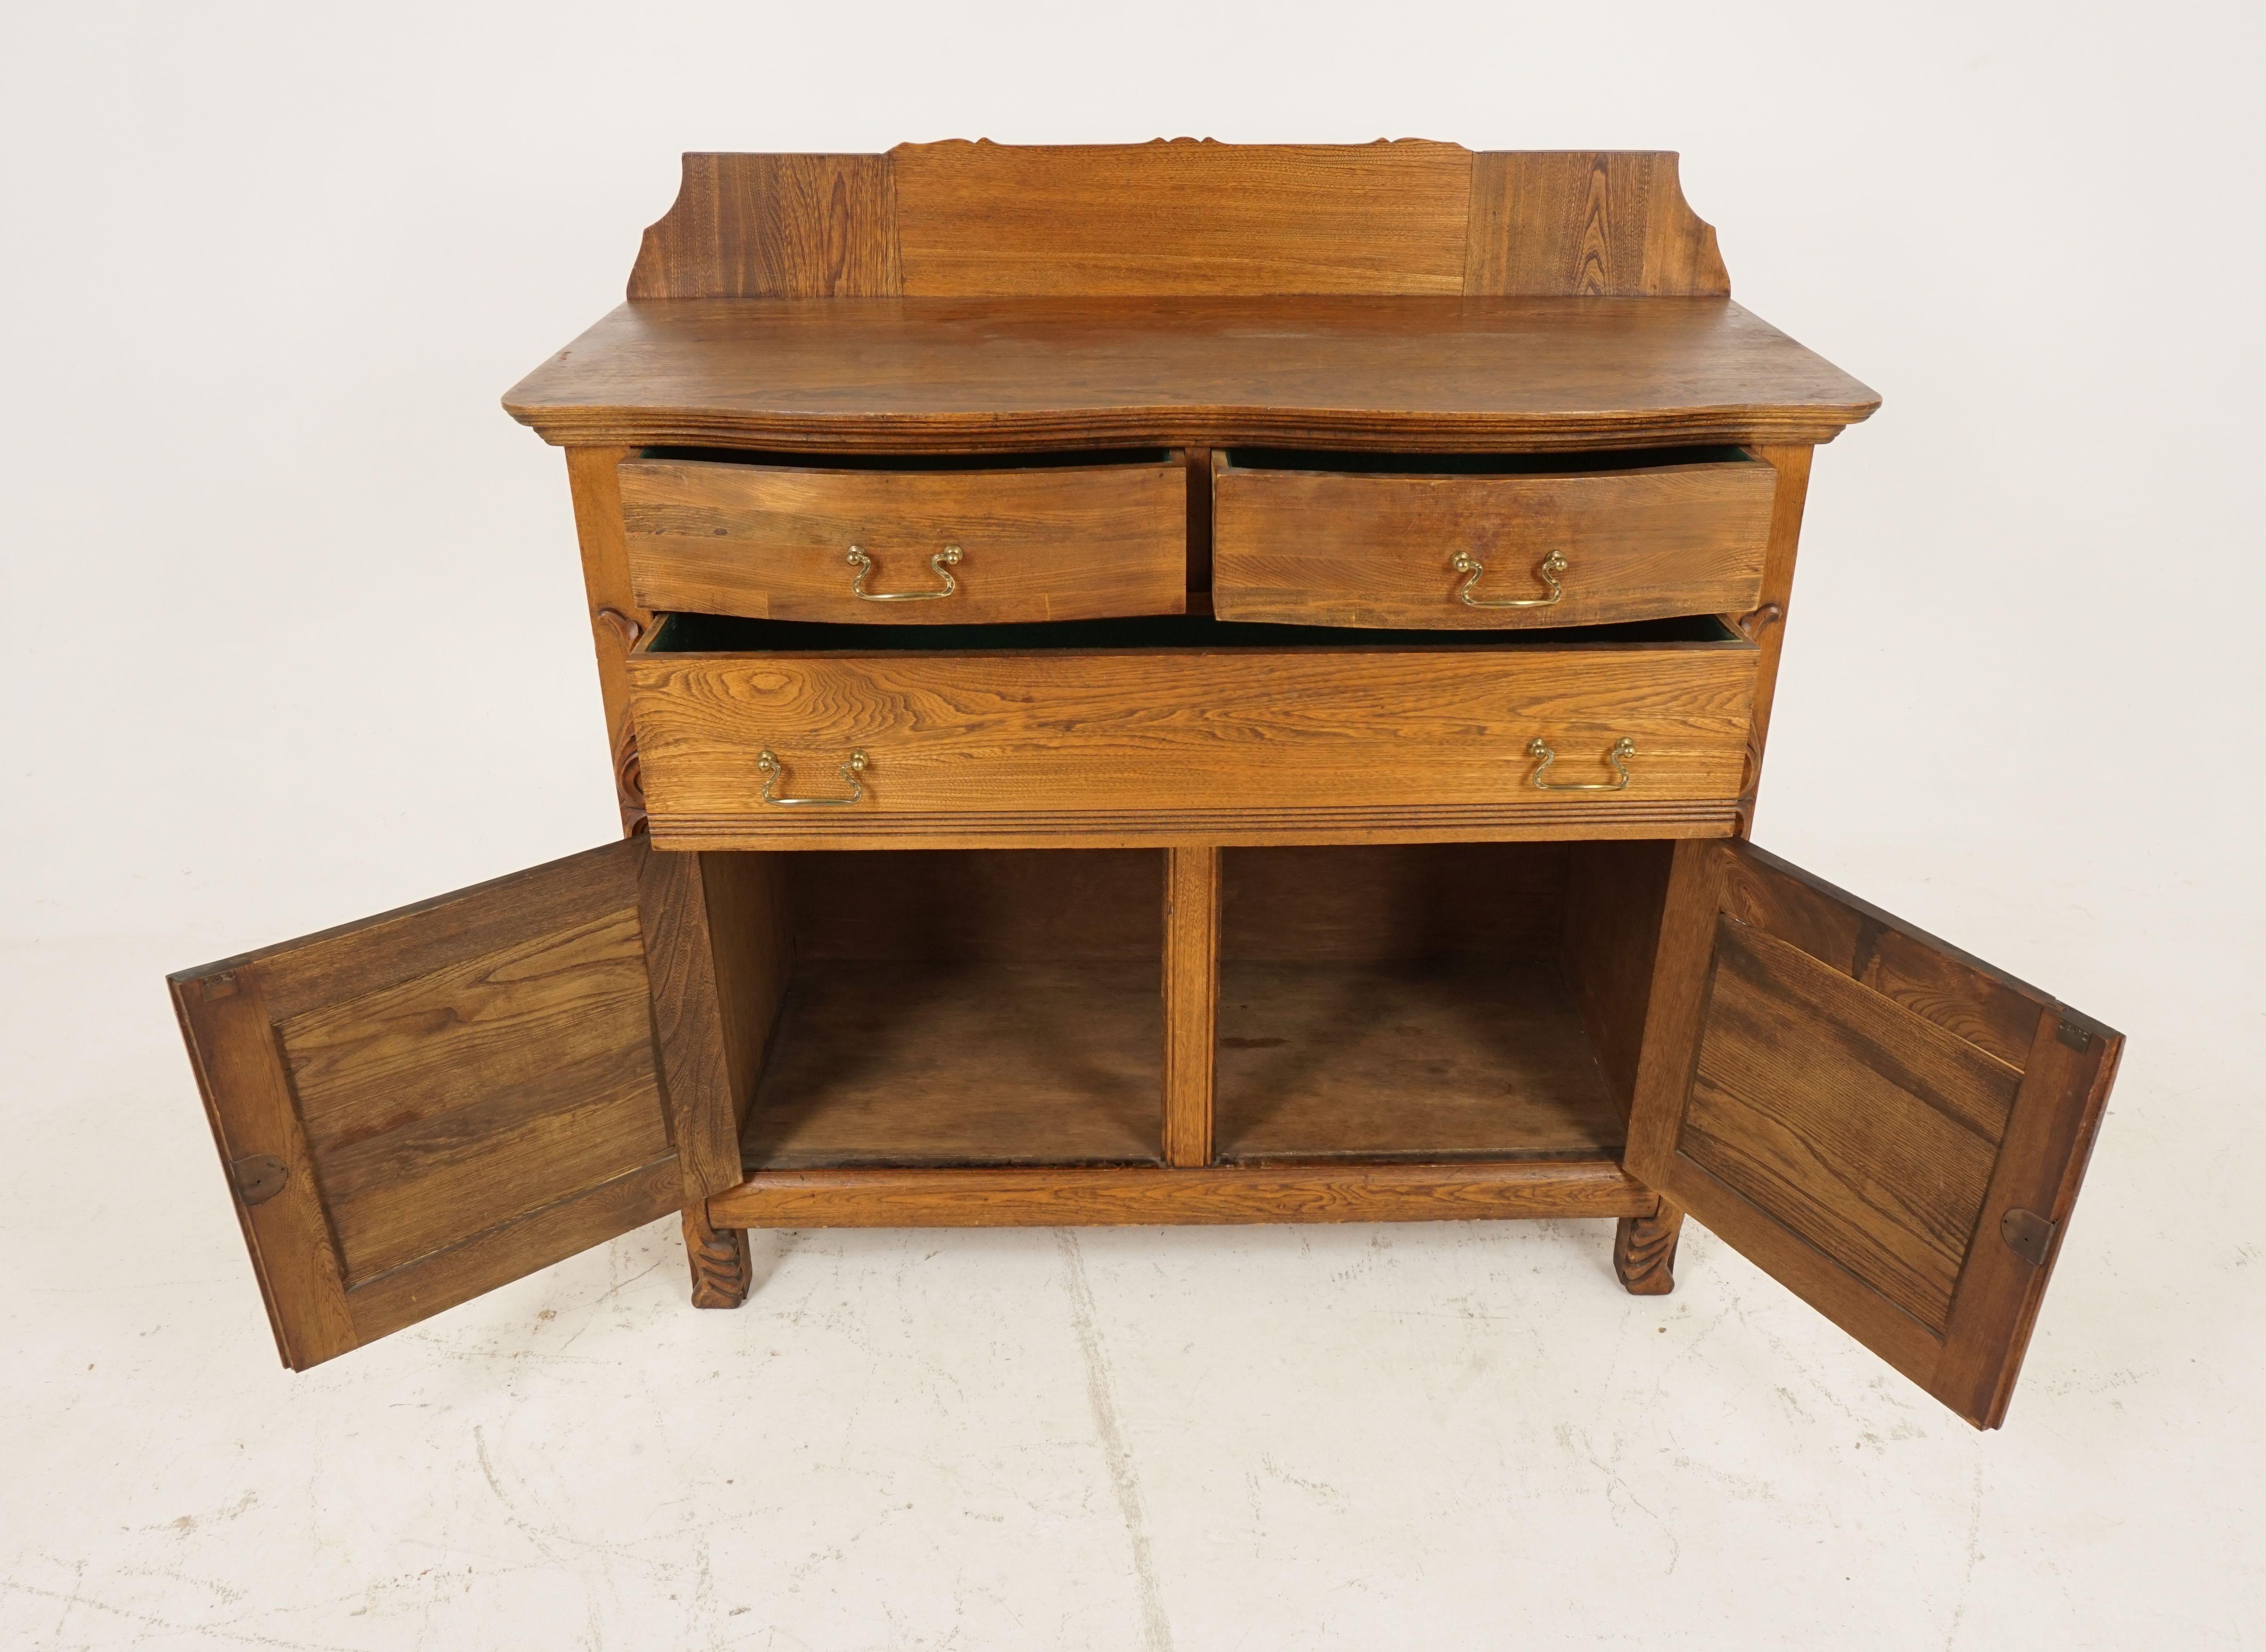 Antique ash sideboard, serpentine front sideboard buffet, American 1900, B2106

American, 1900
Solid ash
Original finish
Gallery back
Serpentine top
Pair of lined dovetailed drawers
Full length lined drawers underneath
Pair of paneled